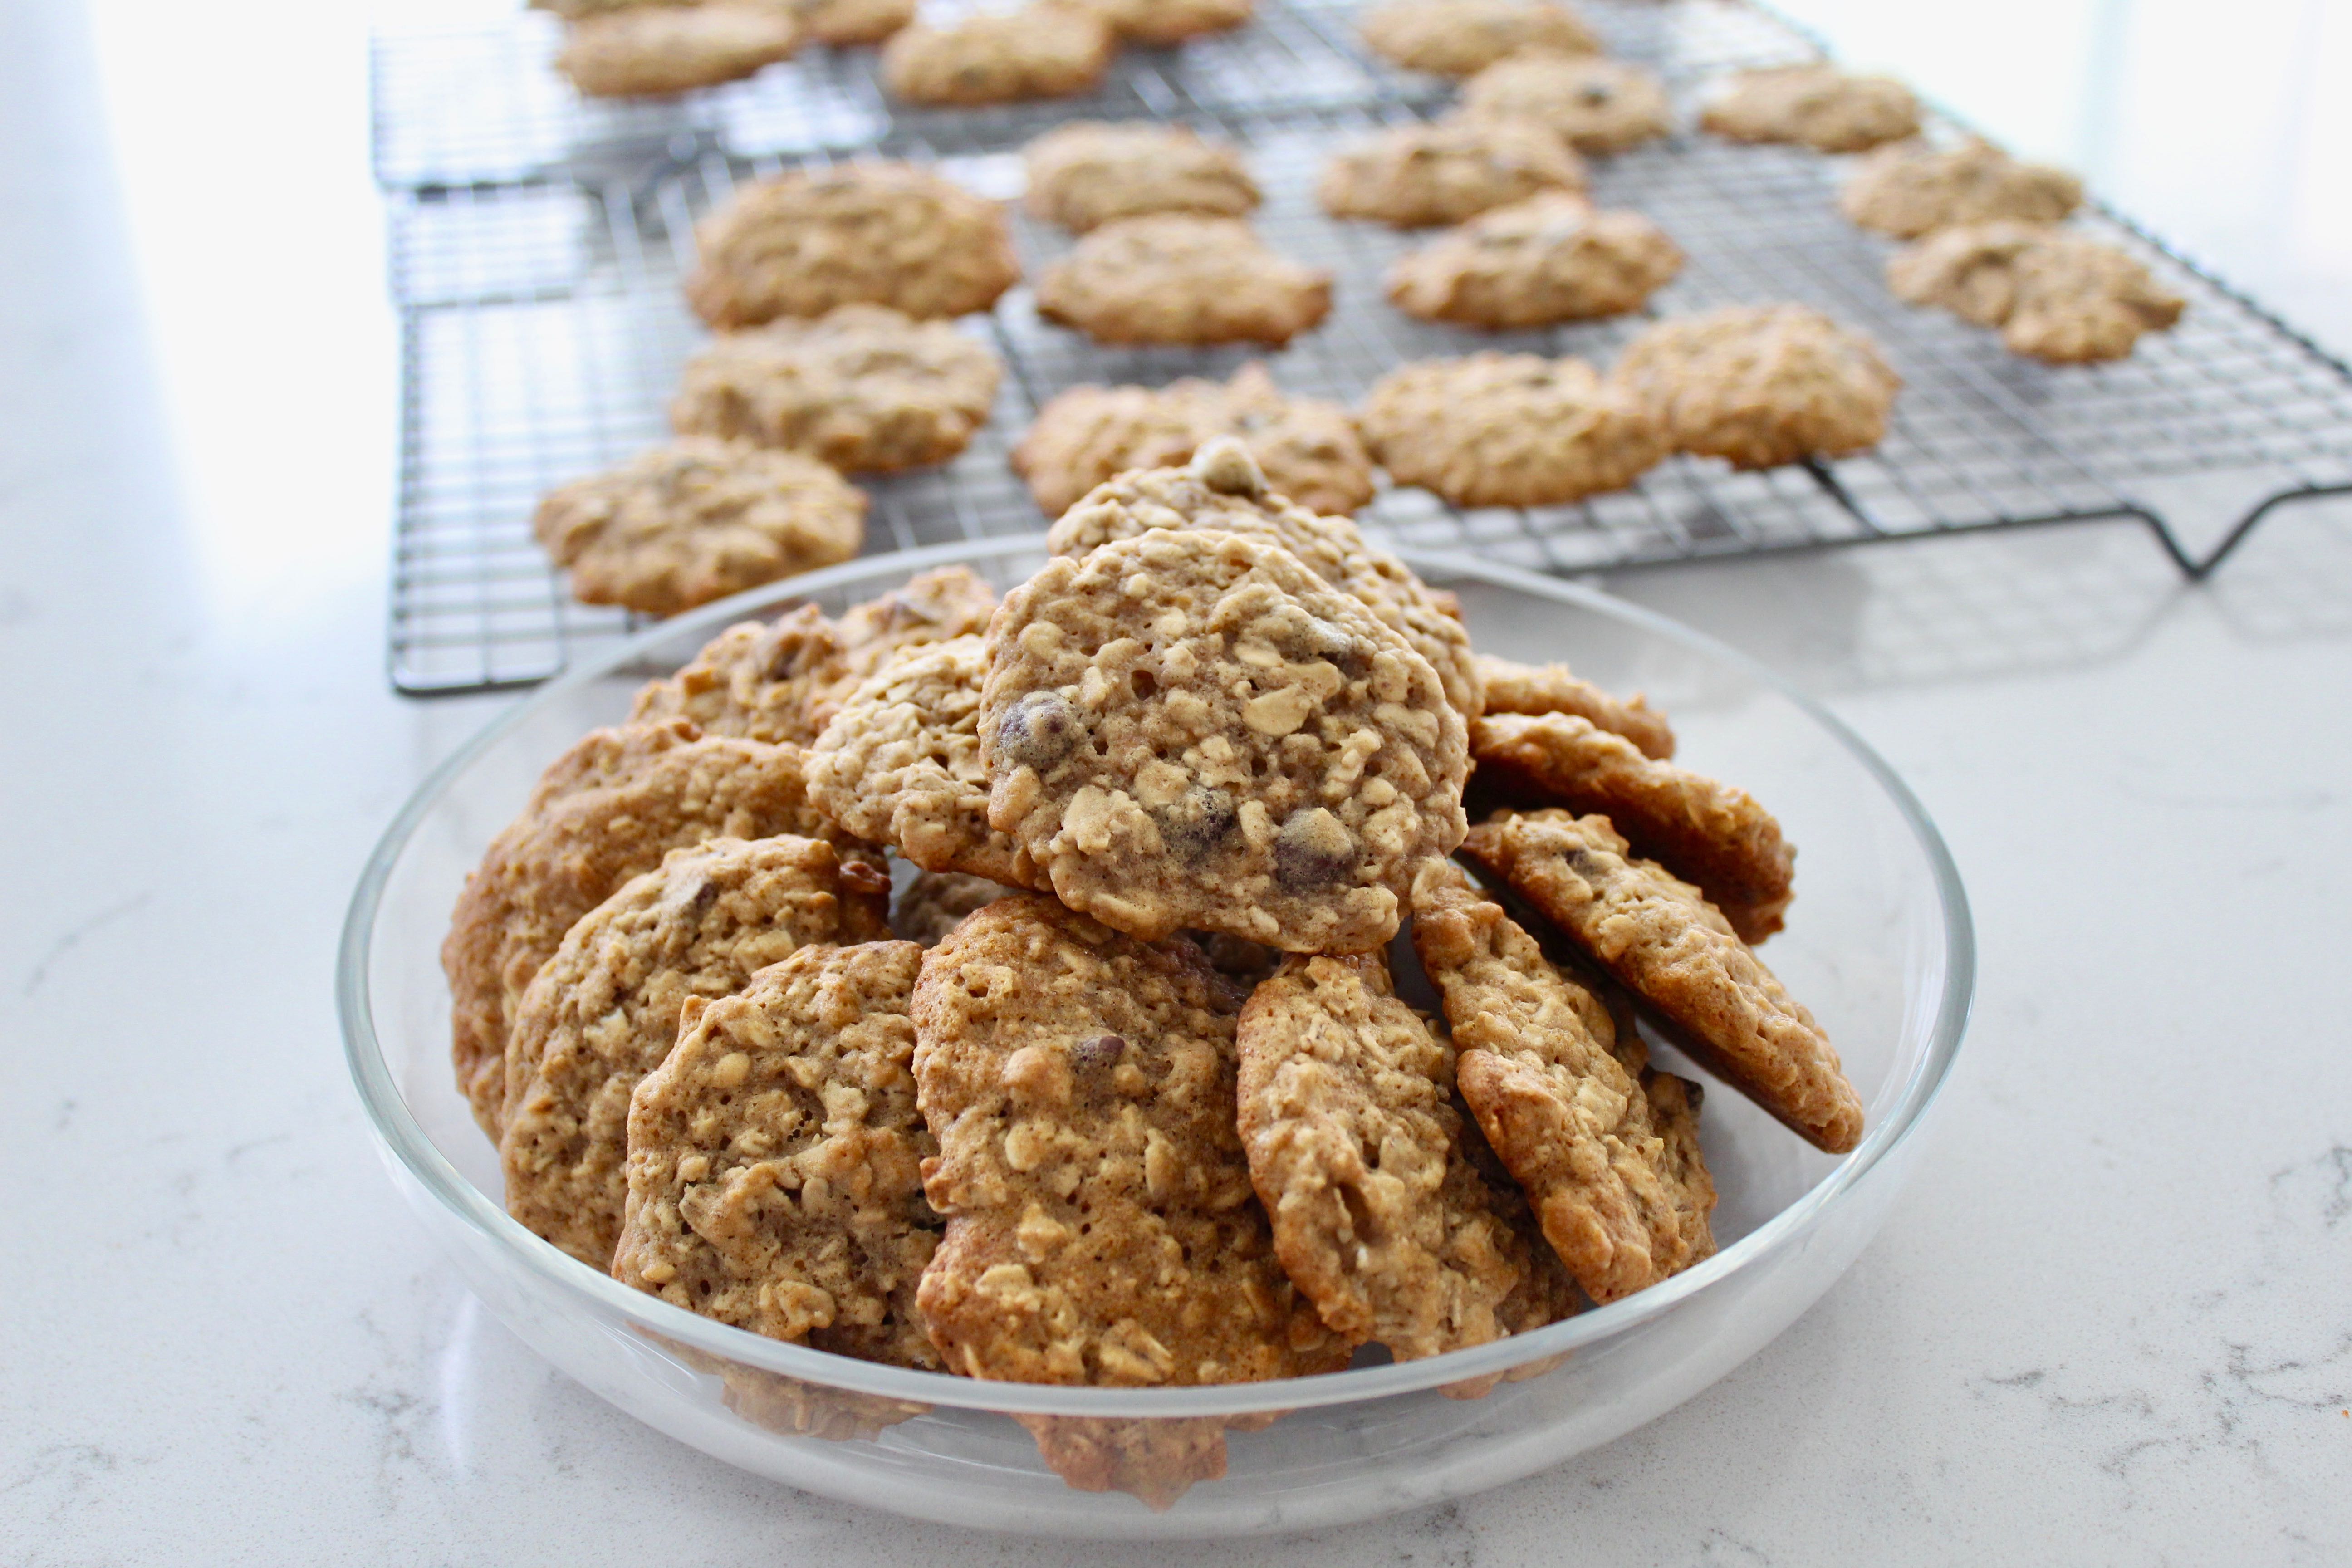 Top recipes for "Oatmeal Raisin Cookie Recipes" .